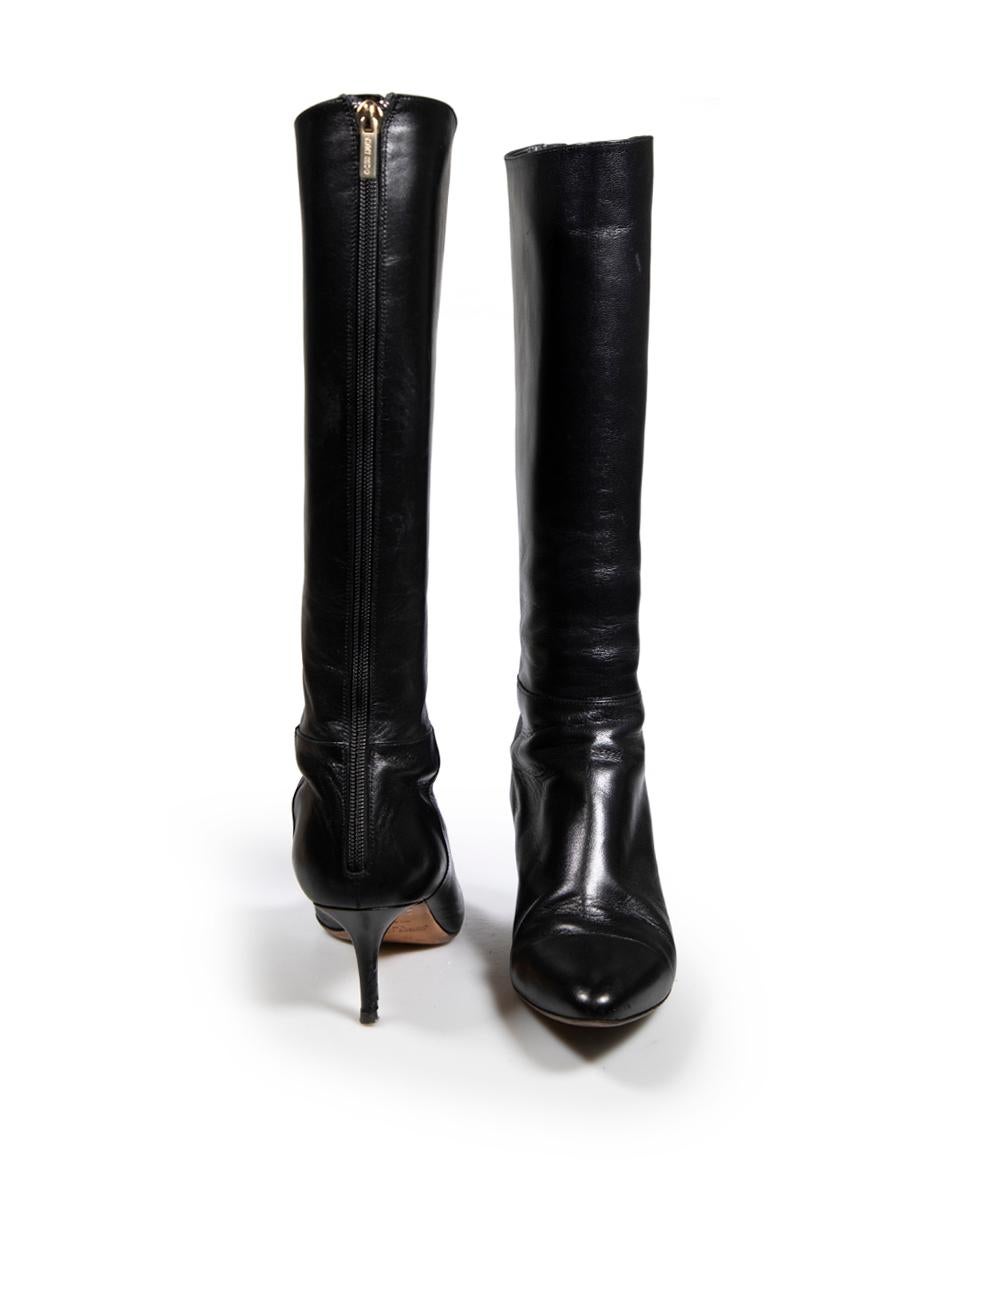 Jimmy Choo Black Leather Mid Heel Knee High Boots Size IT 39 In Good Condition For Sale In London, GB